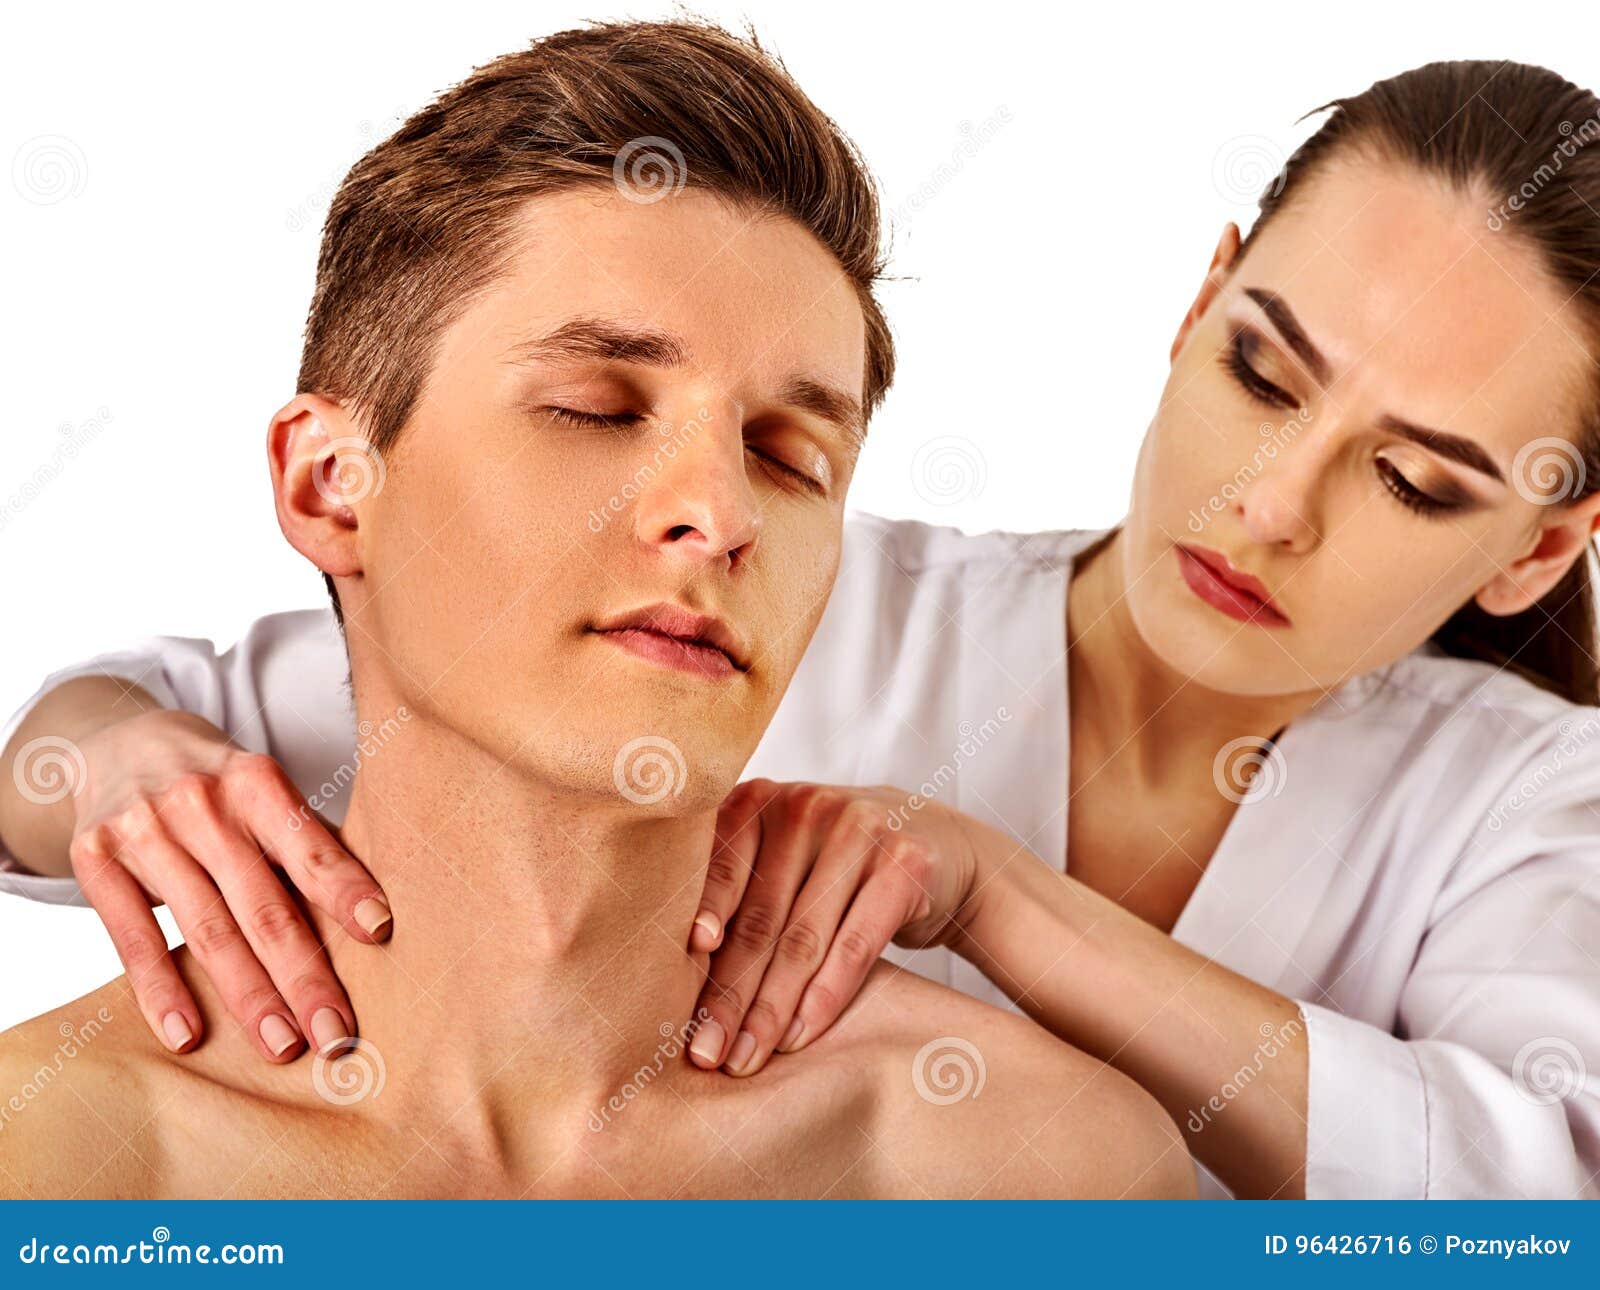 A guy your when shoulders massages What does